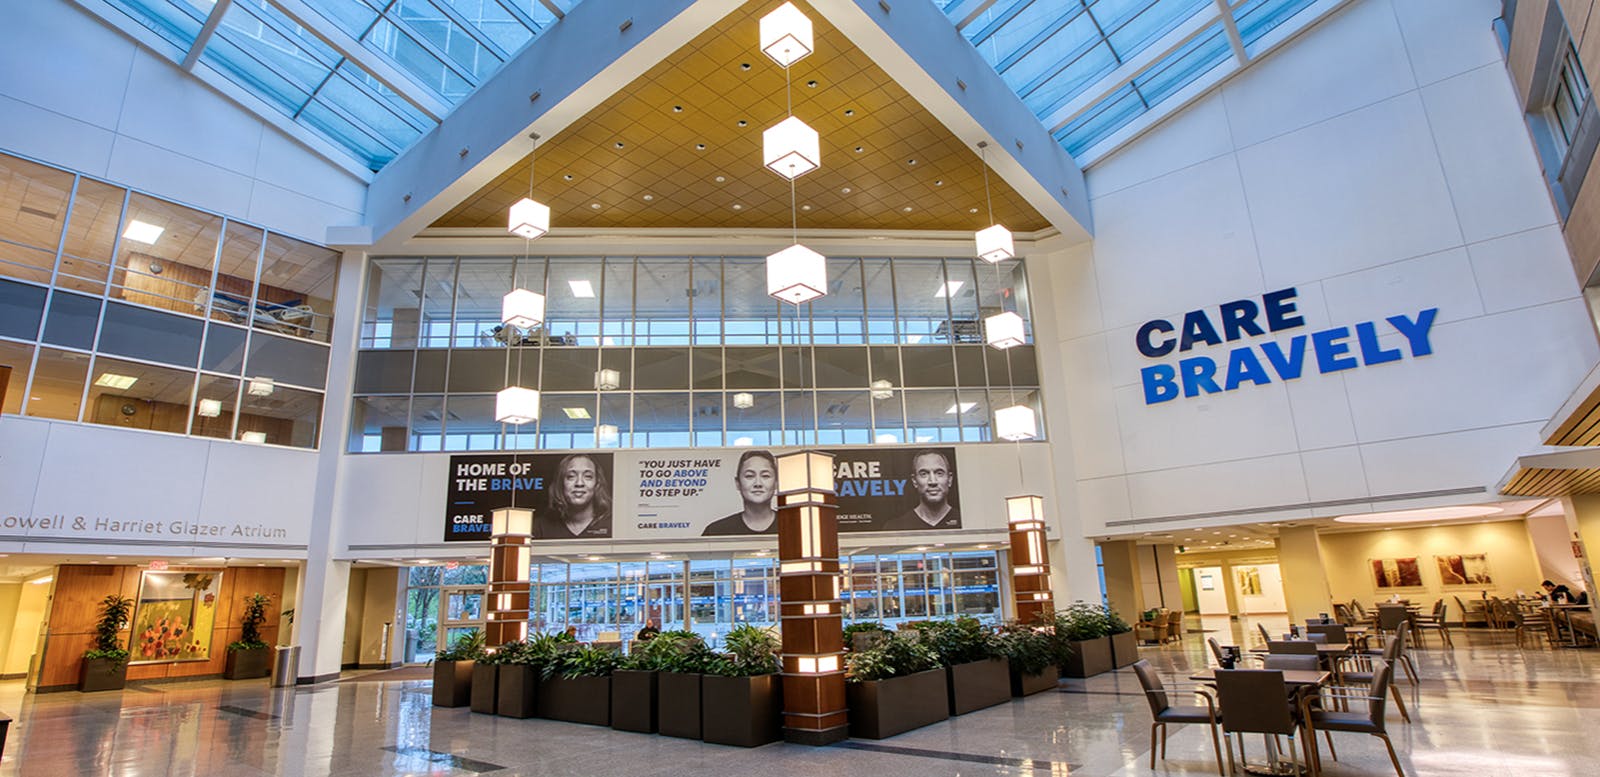 Visuals from the “Care Bravely” campaign are displayed in an indoor lobby.